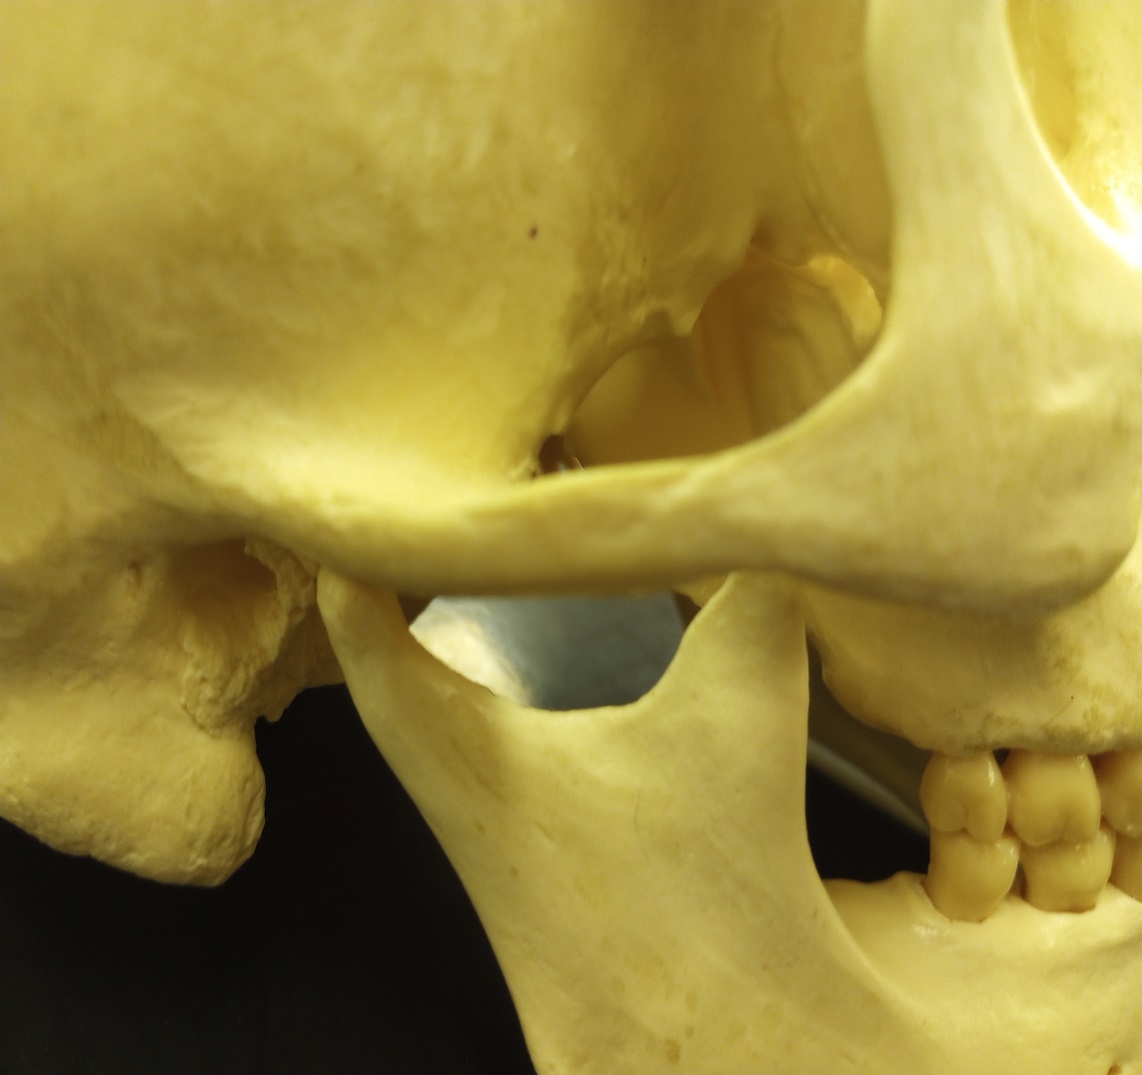 Image showing the wide zygomatic arch found in males.